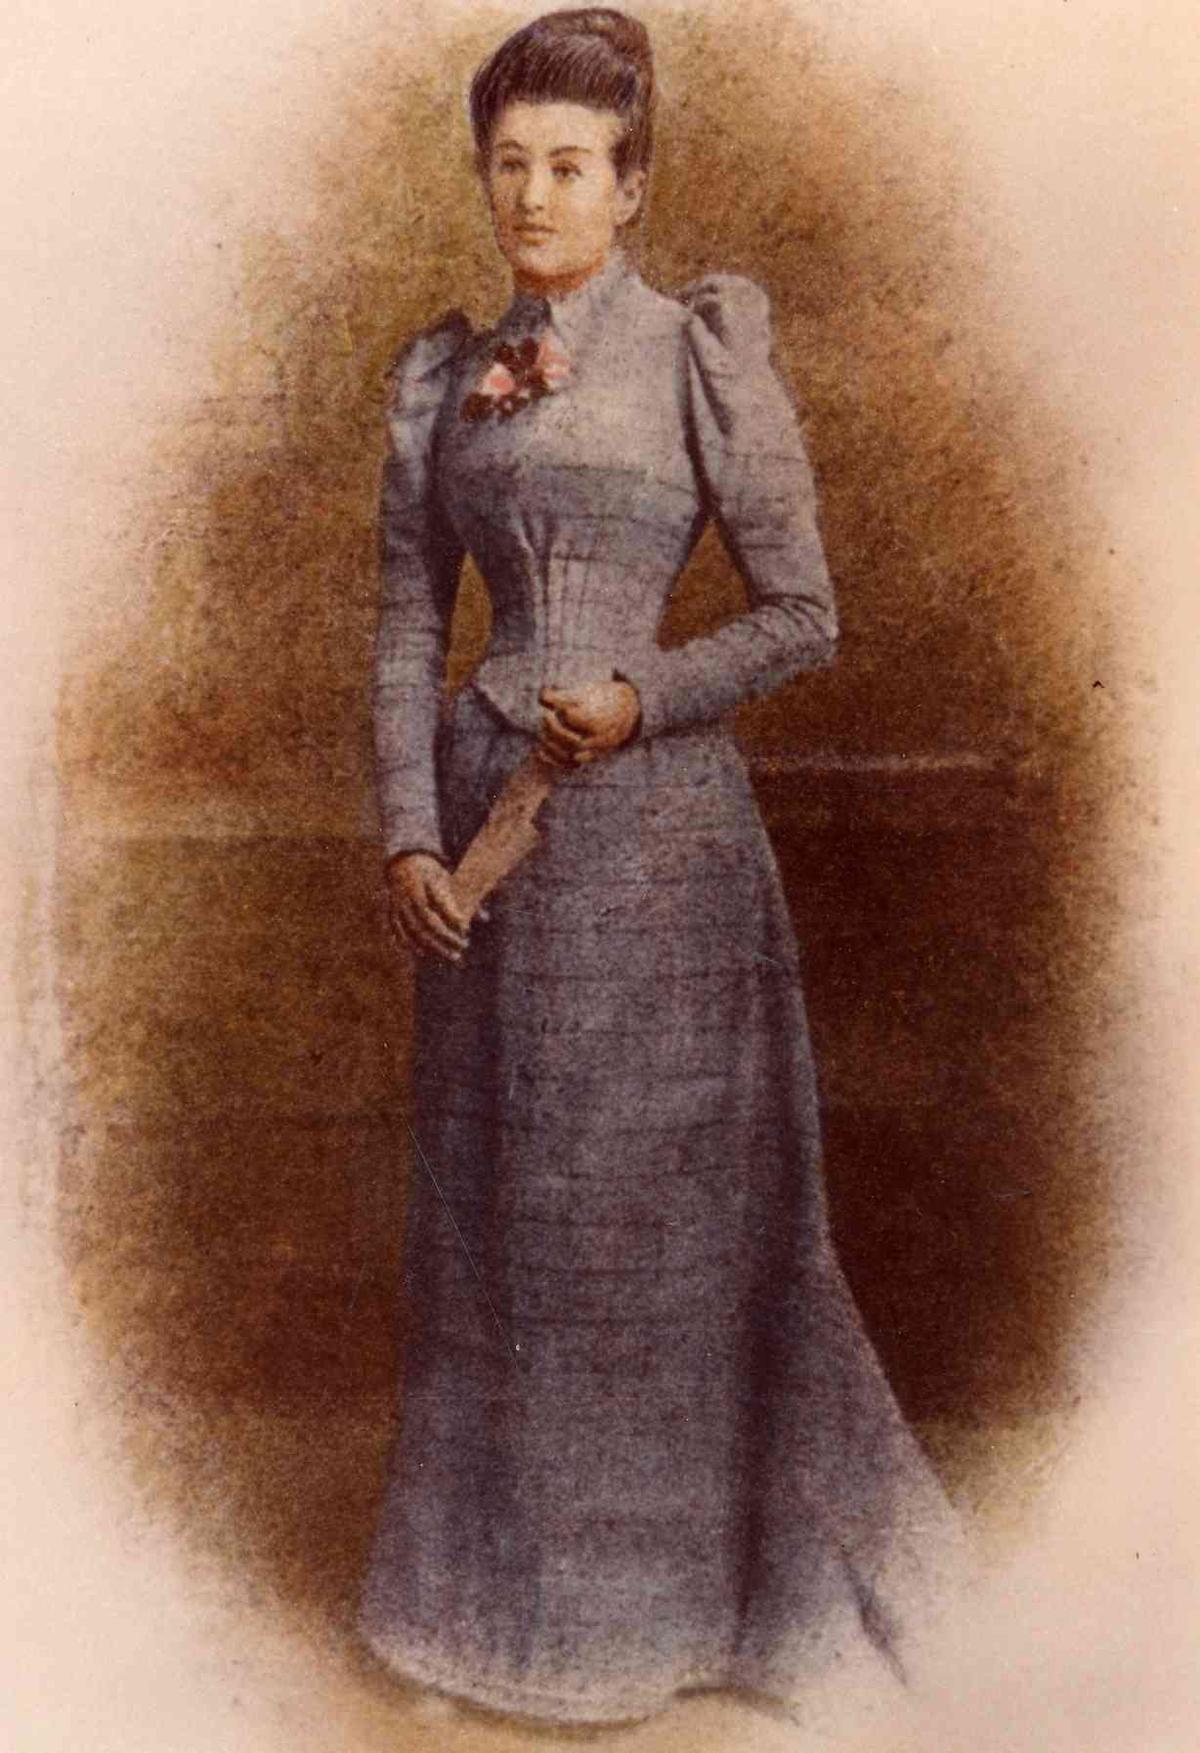 A portrait of Mary Pauline O'Connor (the original “Rose of Tralee”) at 17 years old in 1894. (Public Domain)